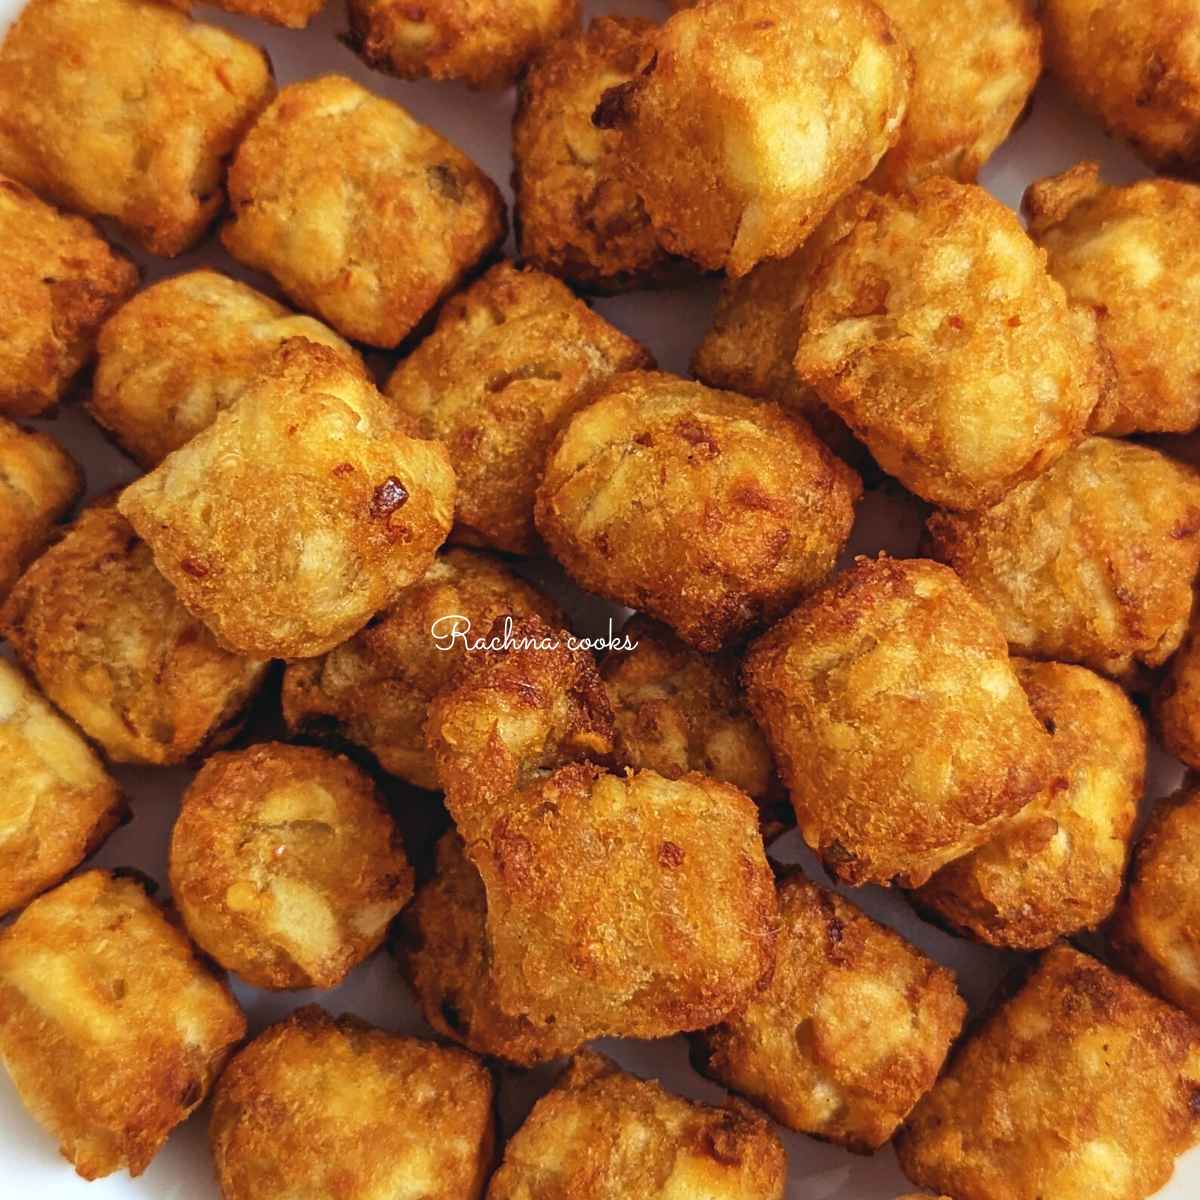 Golden tater tots served on a white plate.